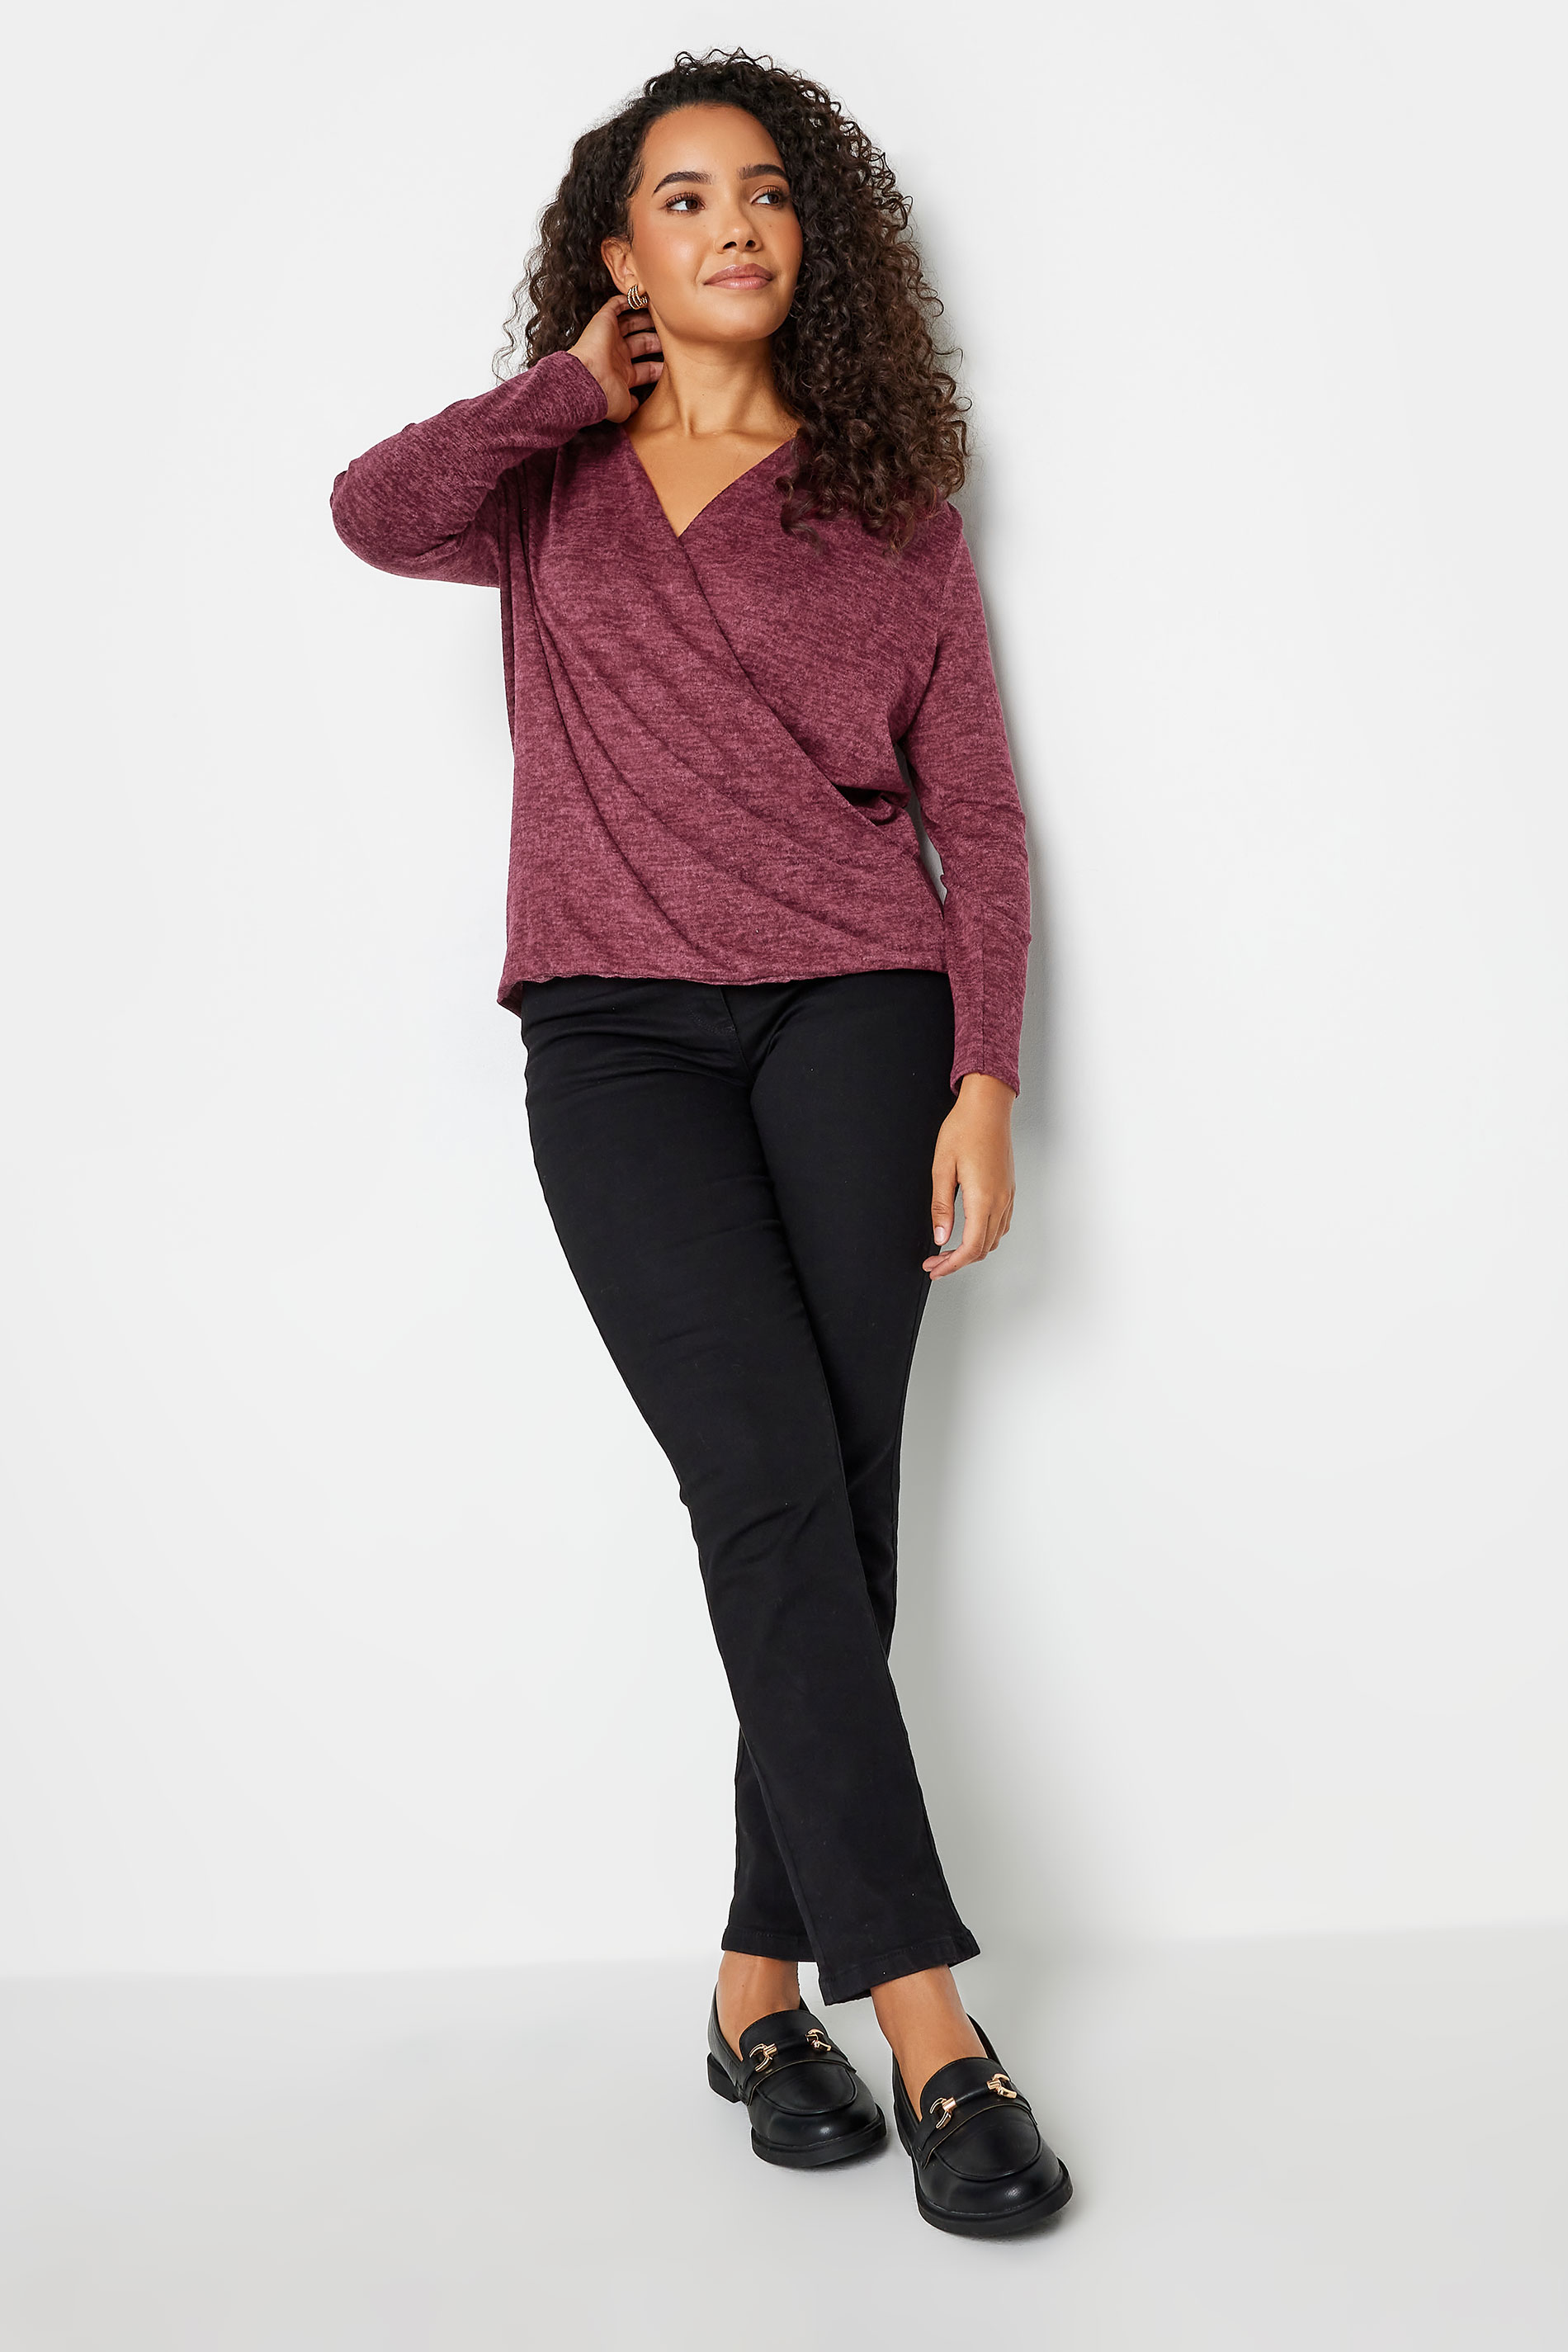 M&Co Berry Red Wrap Over Jumper | M&Co 2